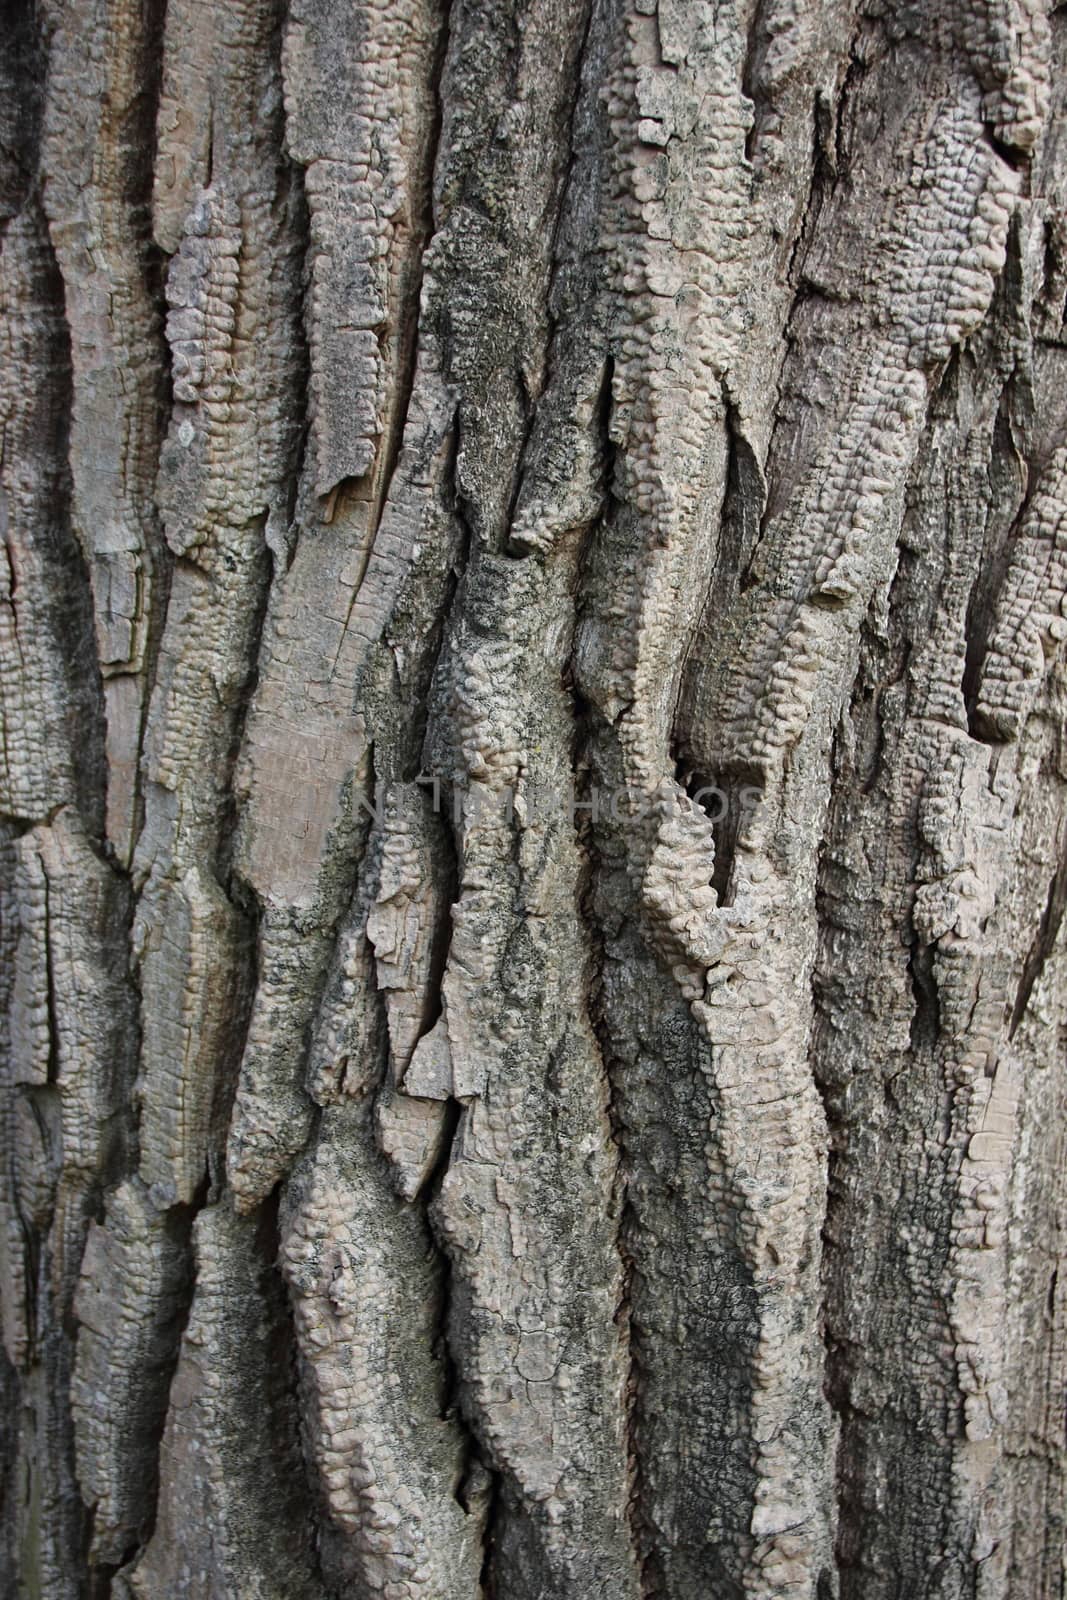 Closeup on Wood Bark Texture Background of Old Willow Tree